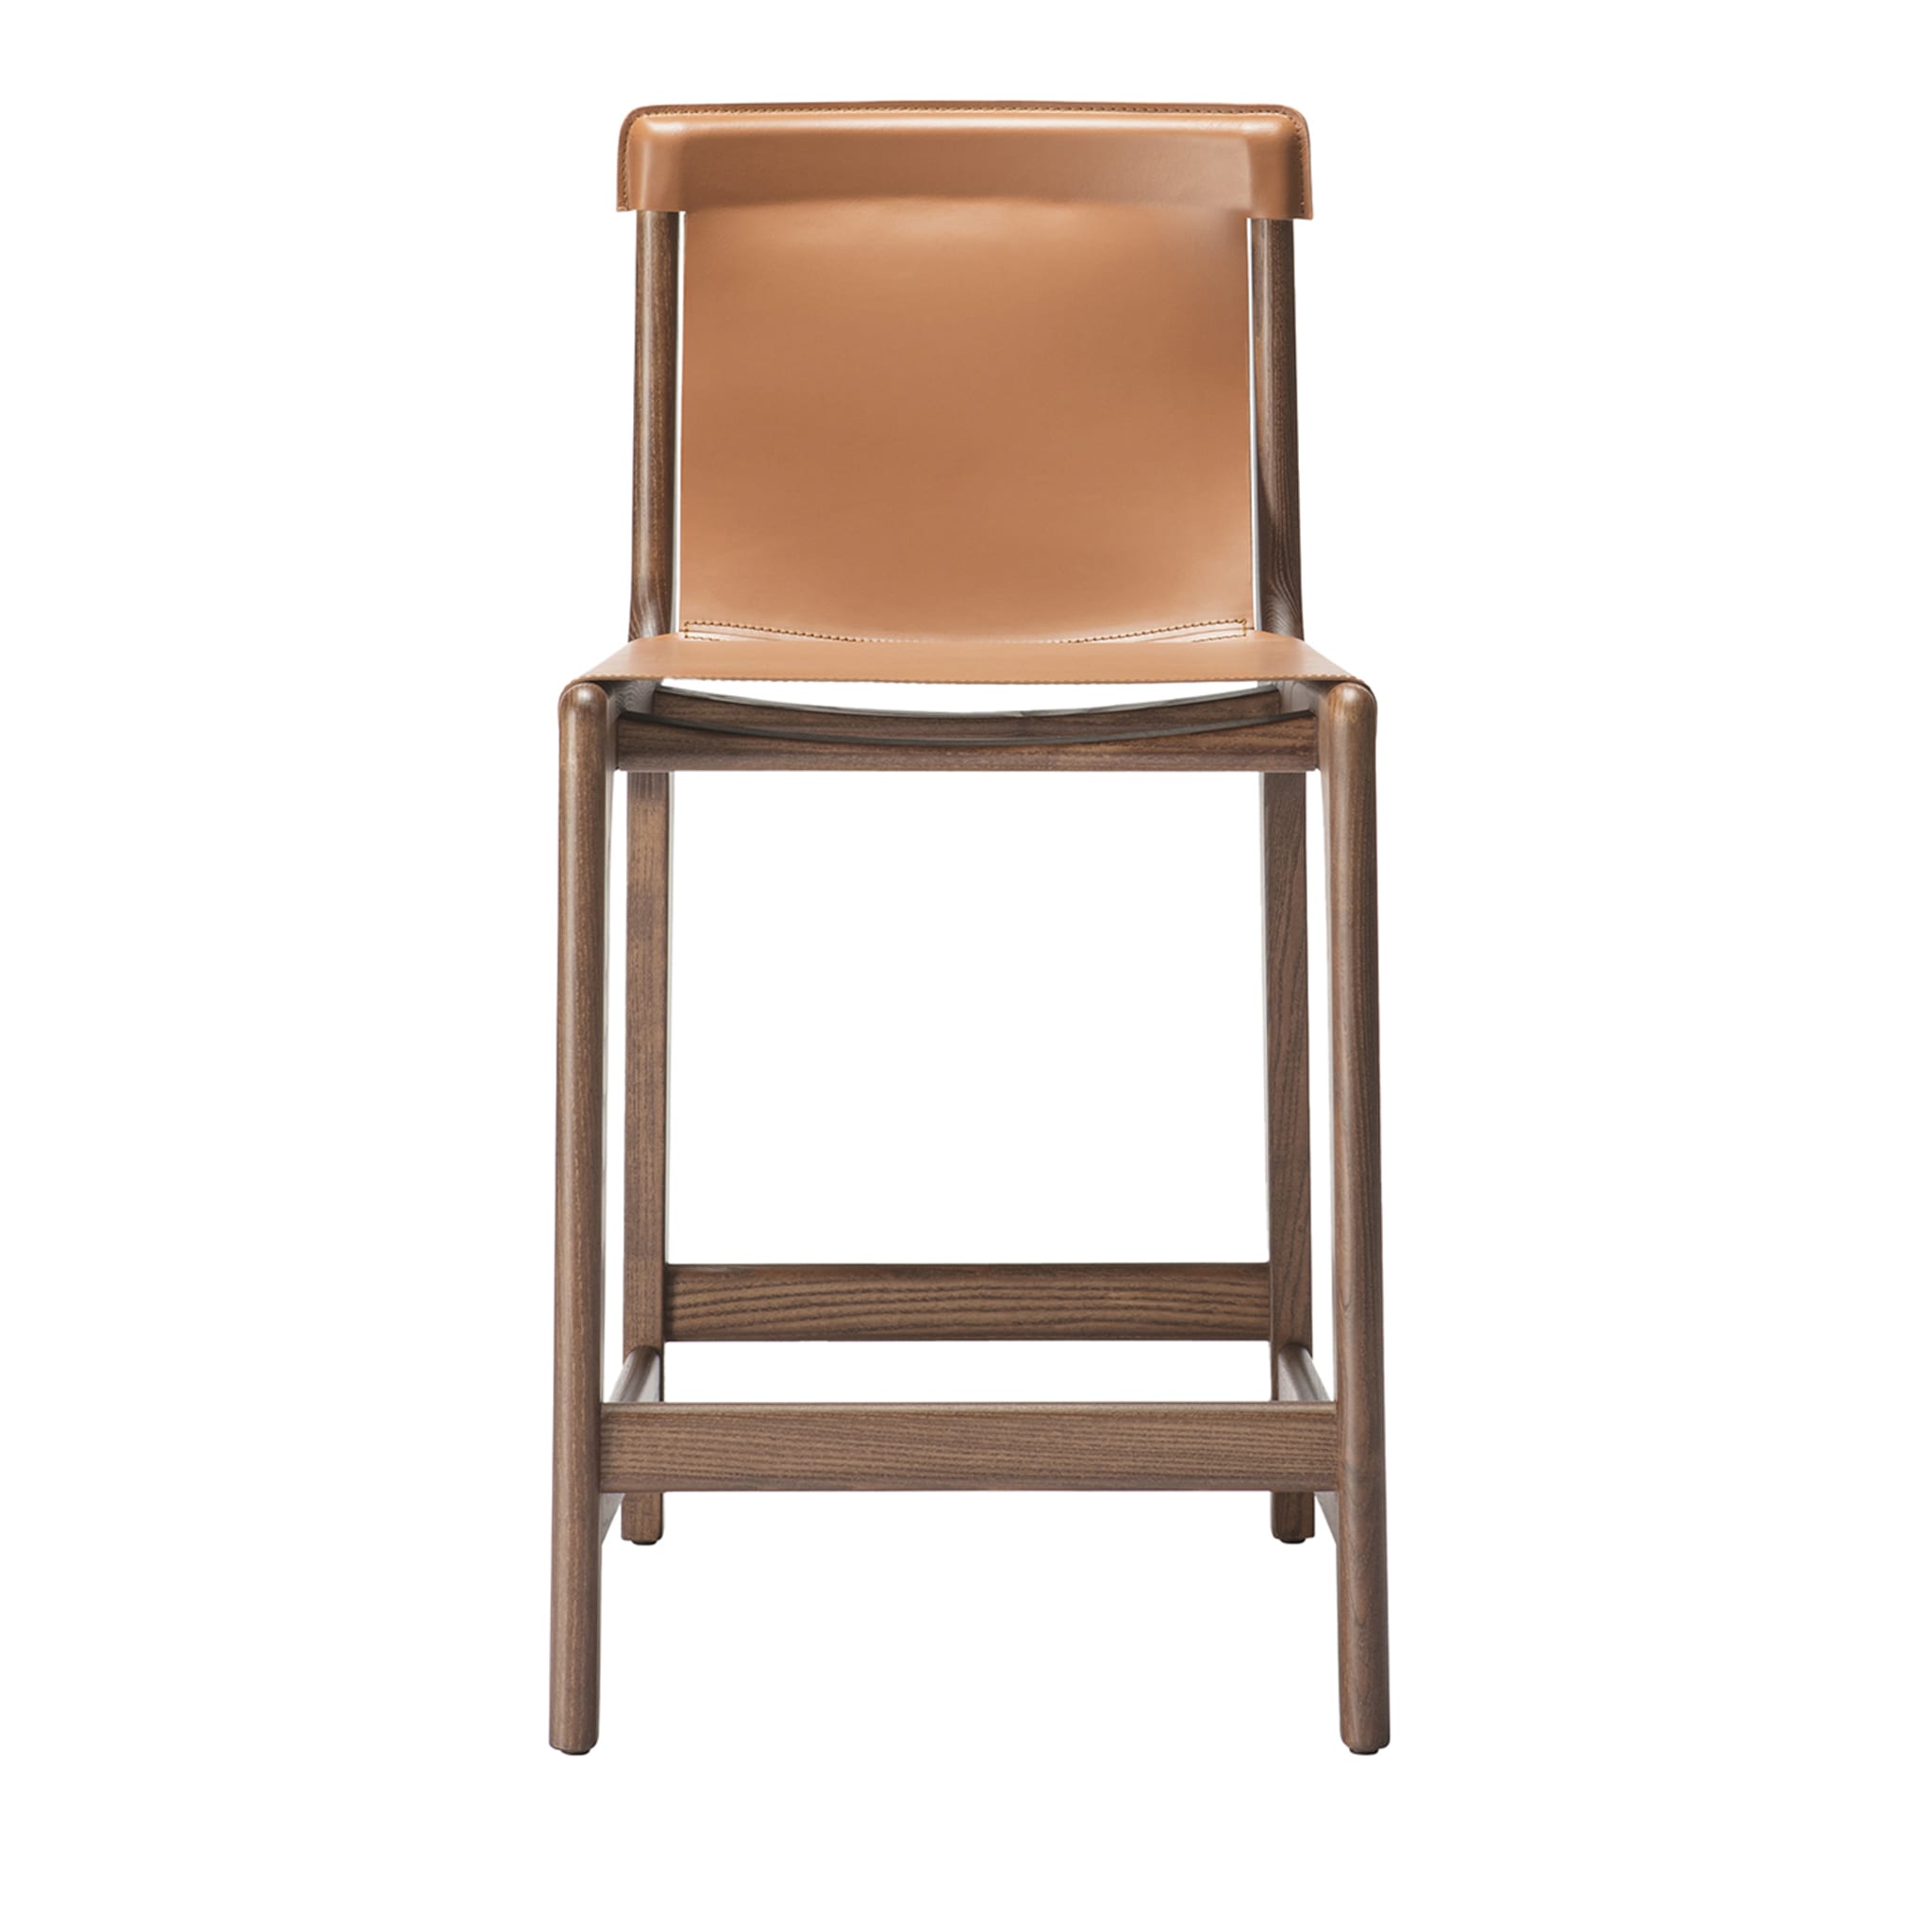 Burano/sg 24 Brown Leather Counter Stool by Balutto Associati - Main view